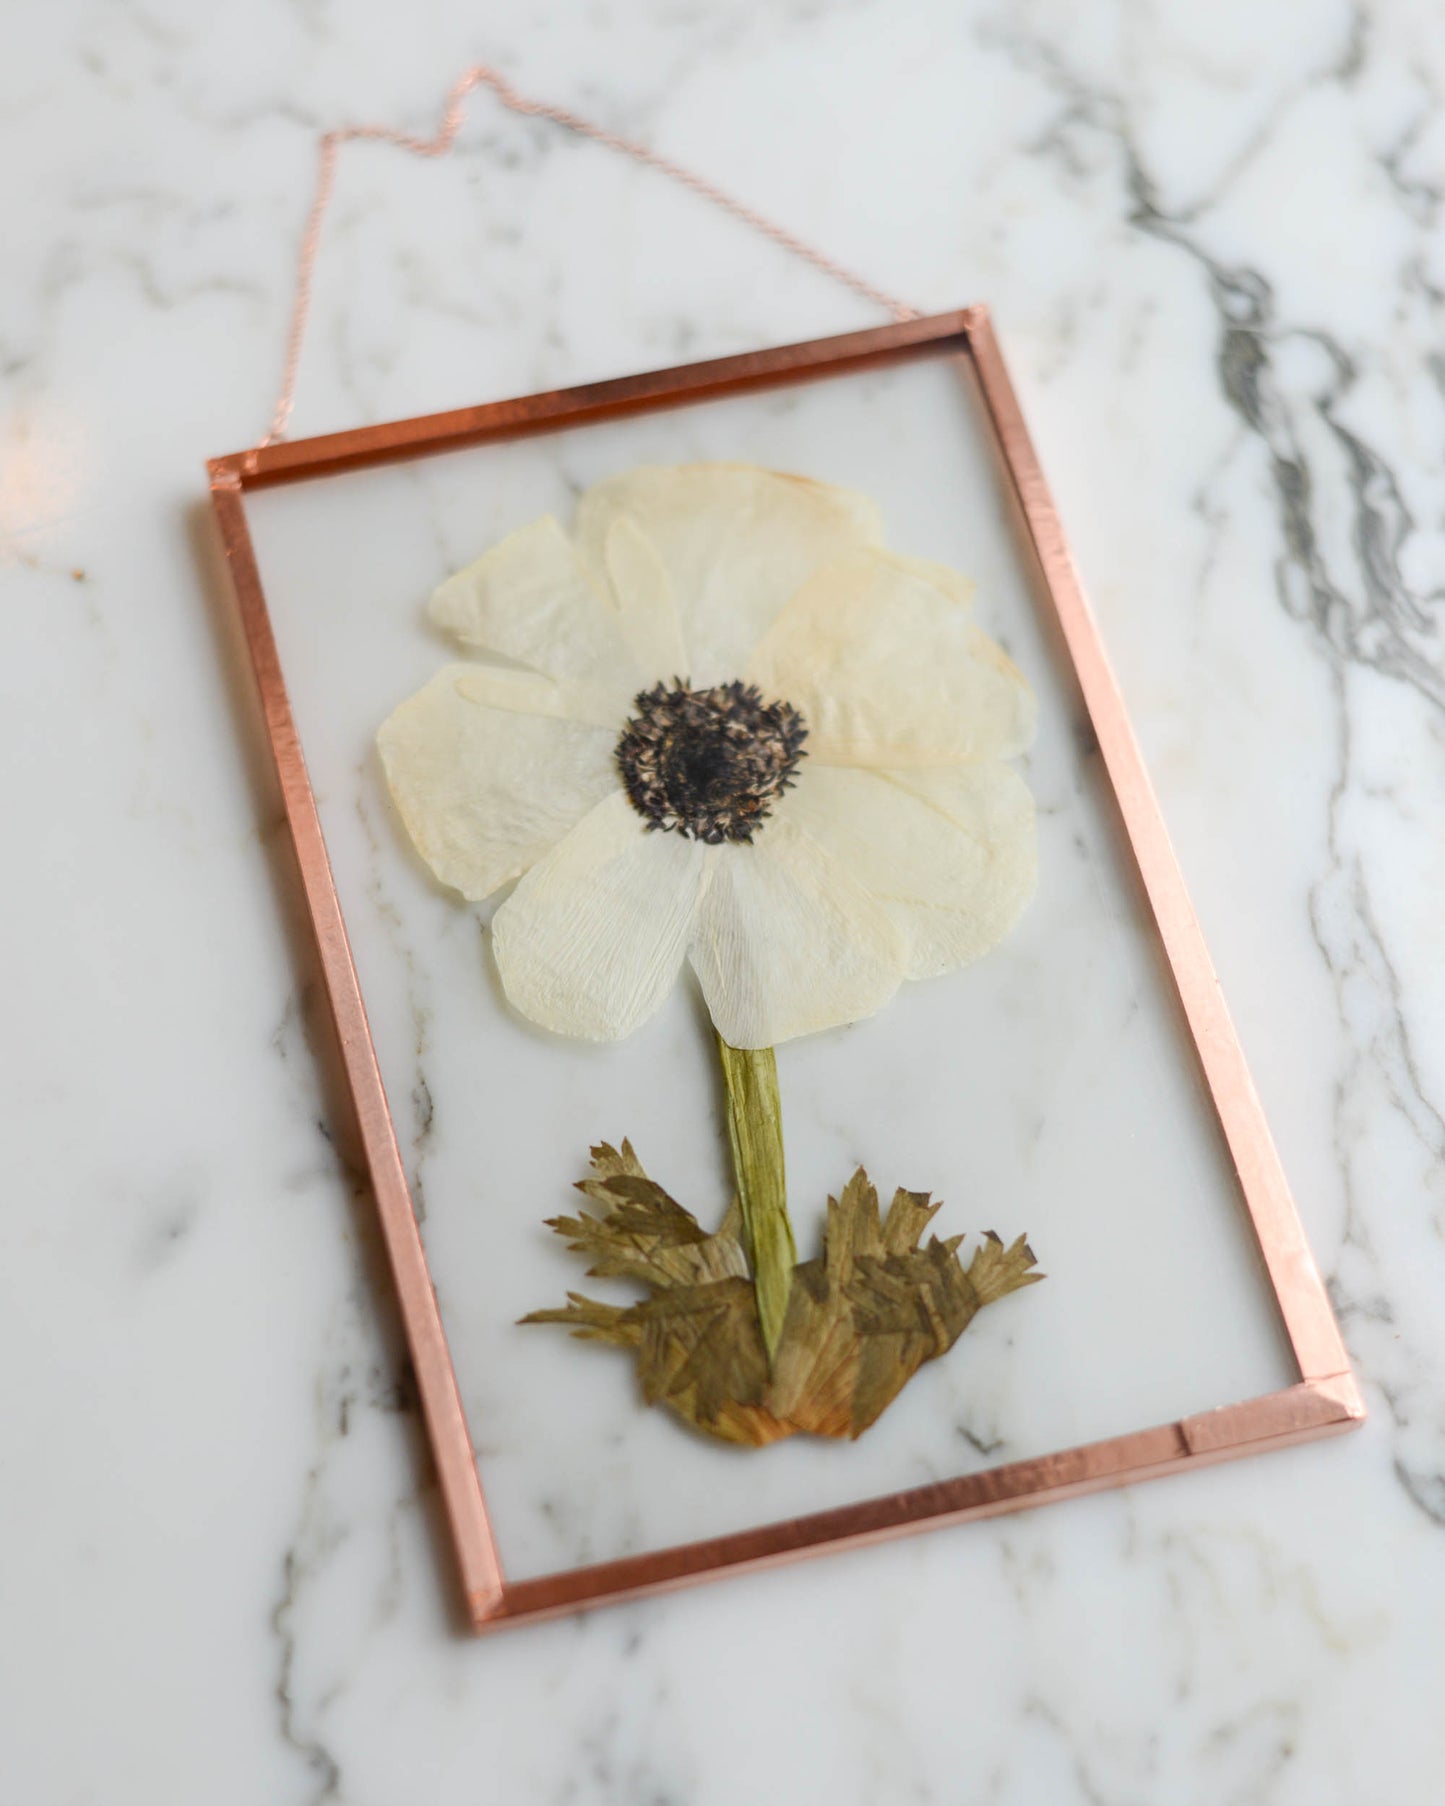 Anemone - Medium Glass and Copper Wall Hanging